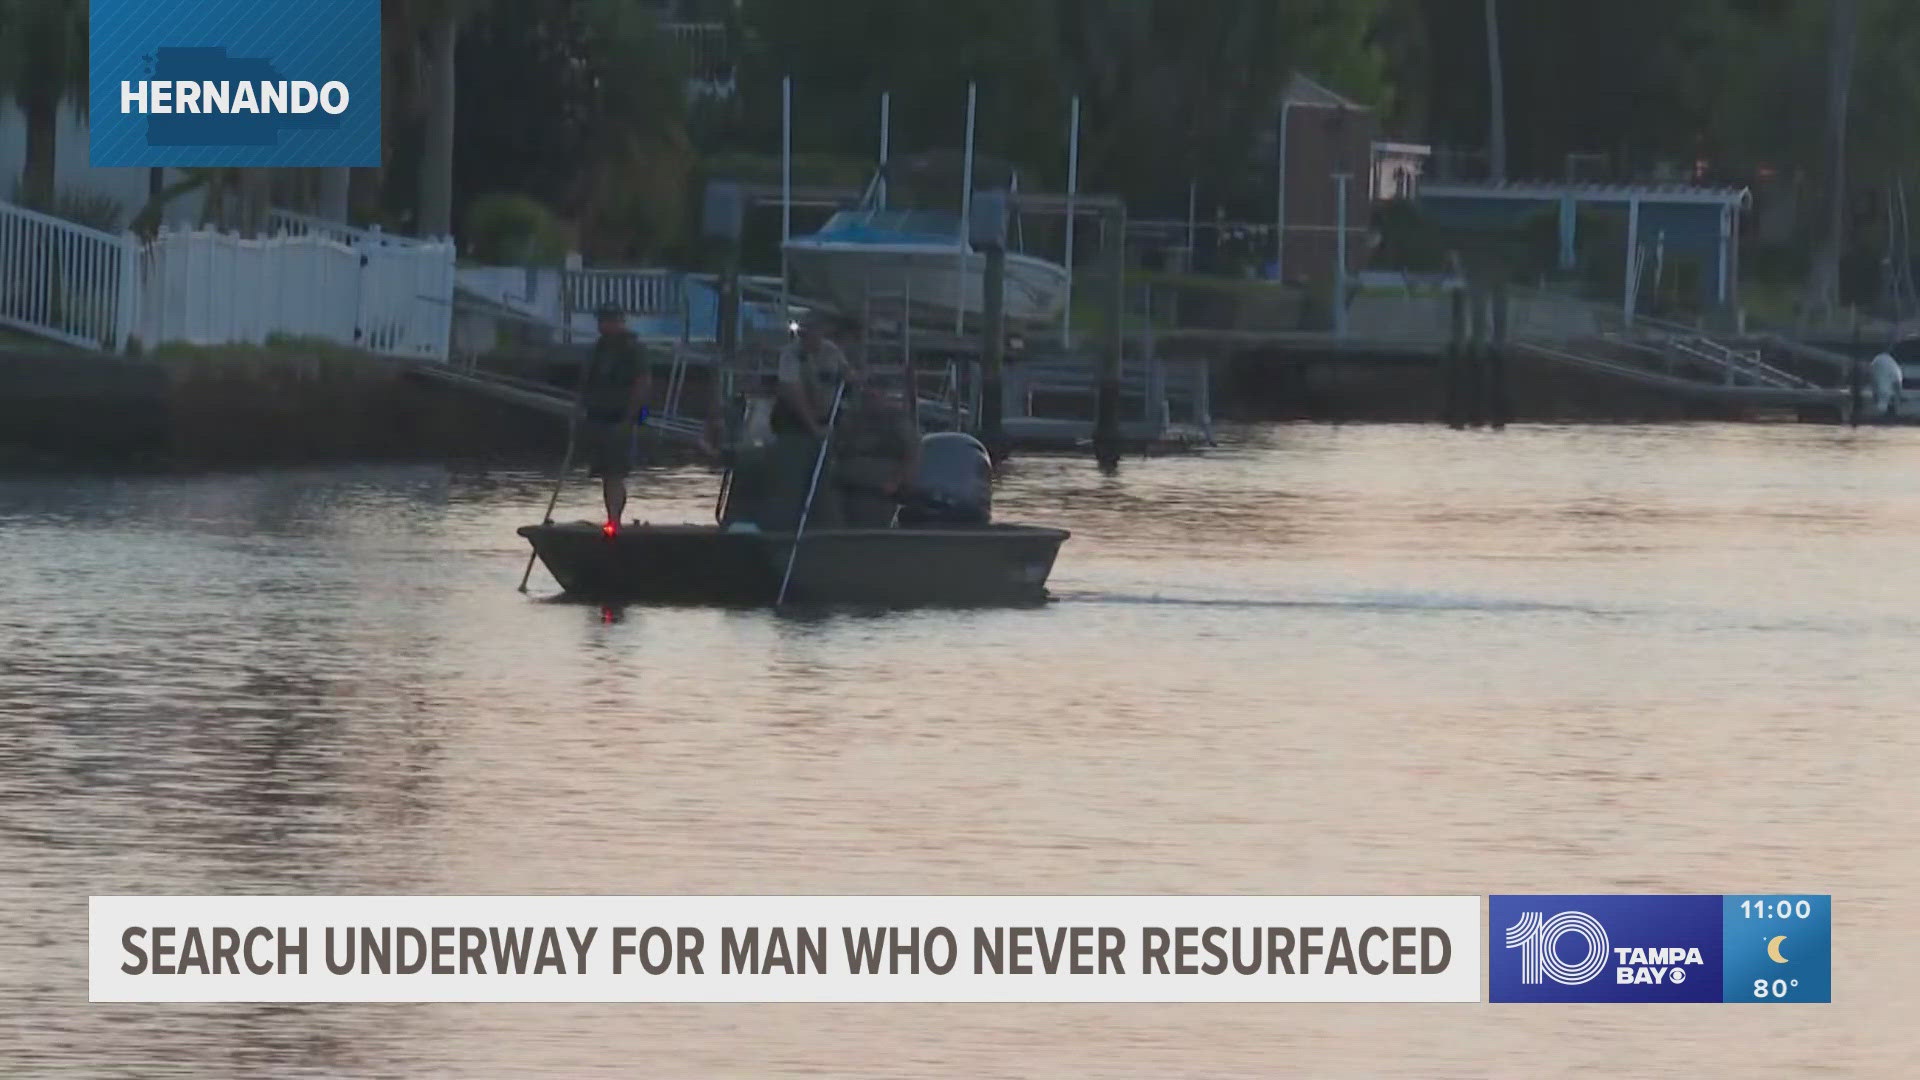 The Hernando County Sheriff's Office marine unit, dive team, patrol deputies and fire rescue have responded to the scene.